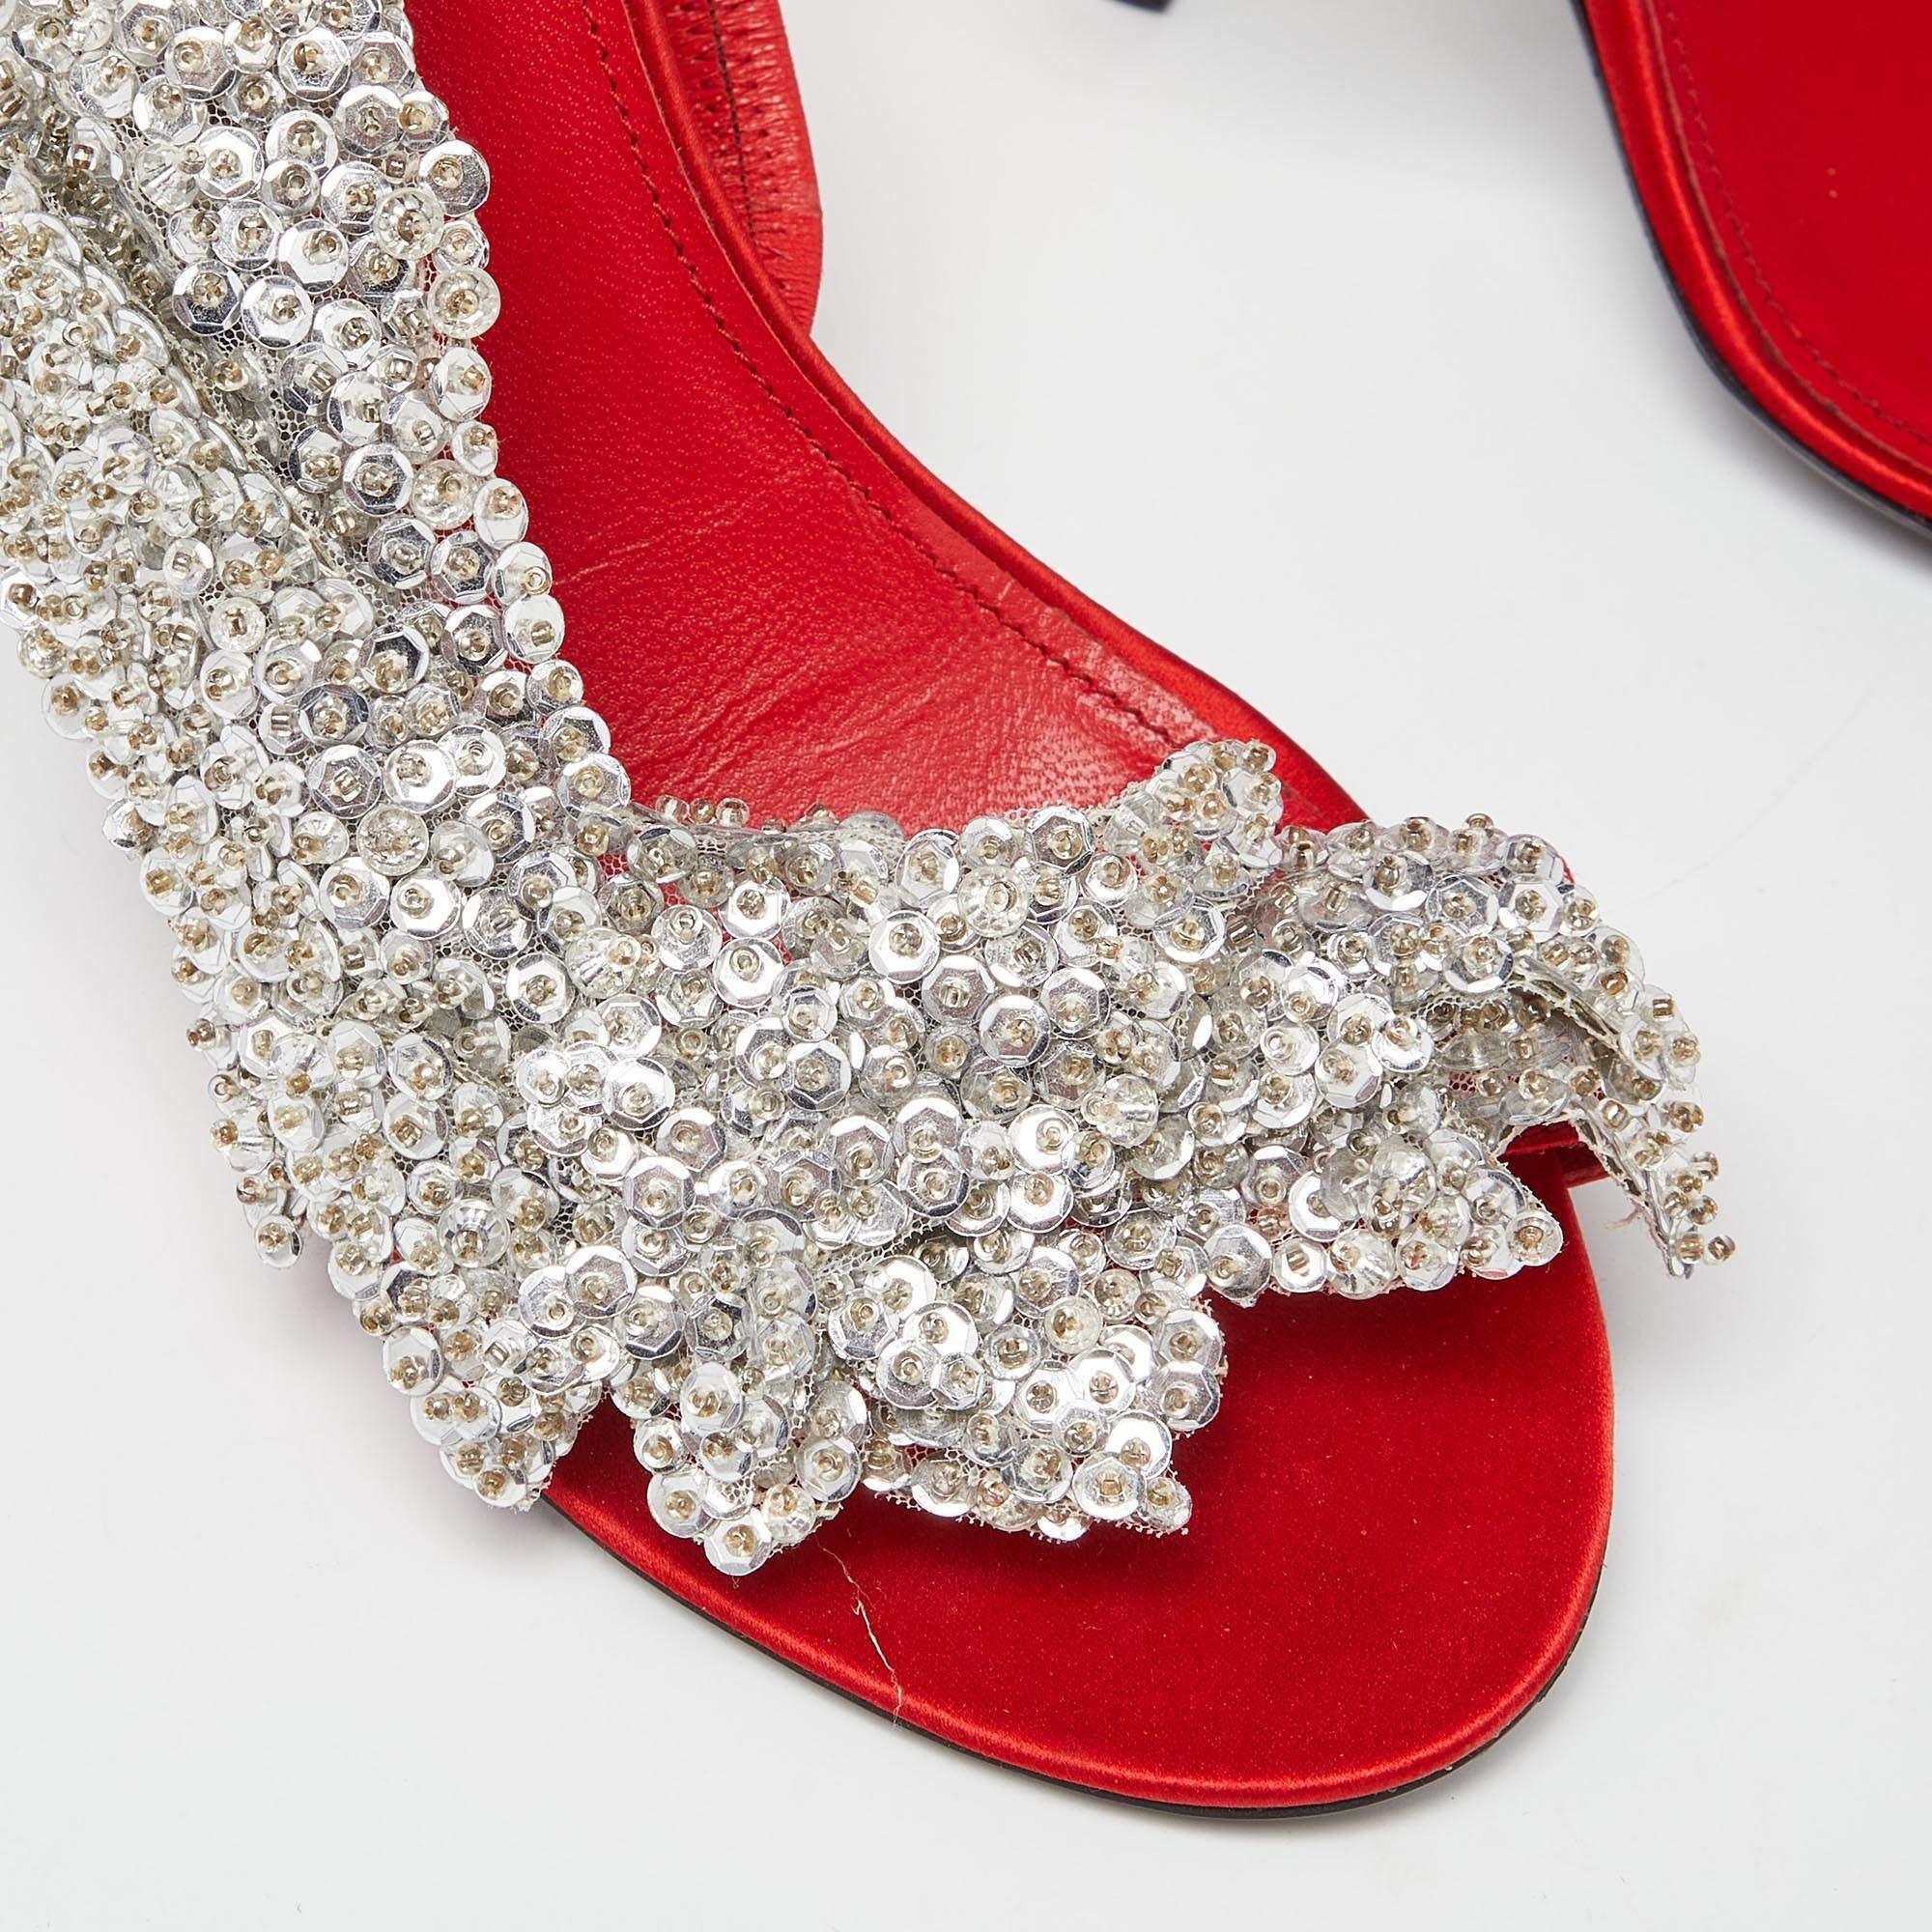 Balenciaga Red Satin Leather Beaded/Sequins Embellished Ankle Strap Sandals Size In Good Condition In Dubai, Al Qouz 2